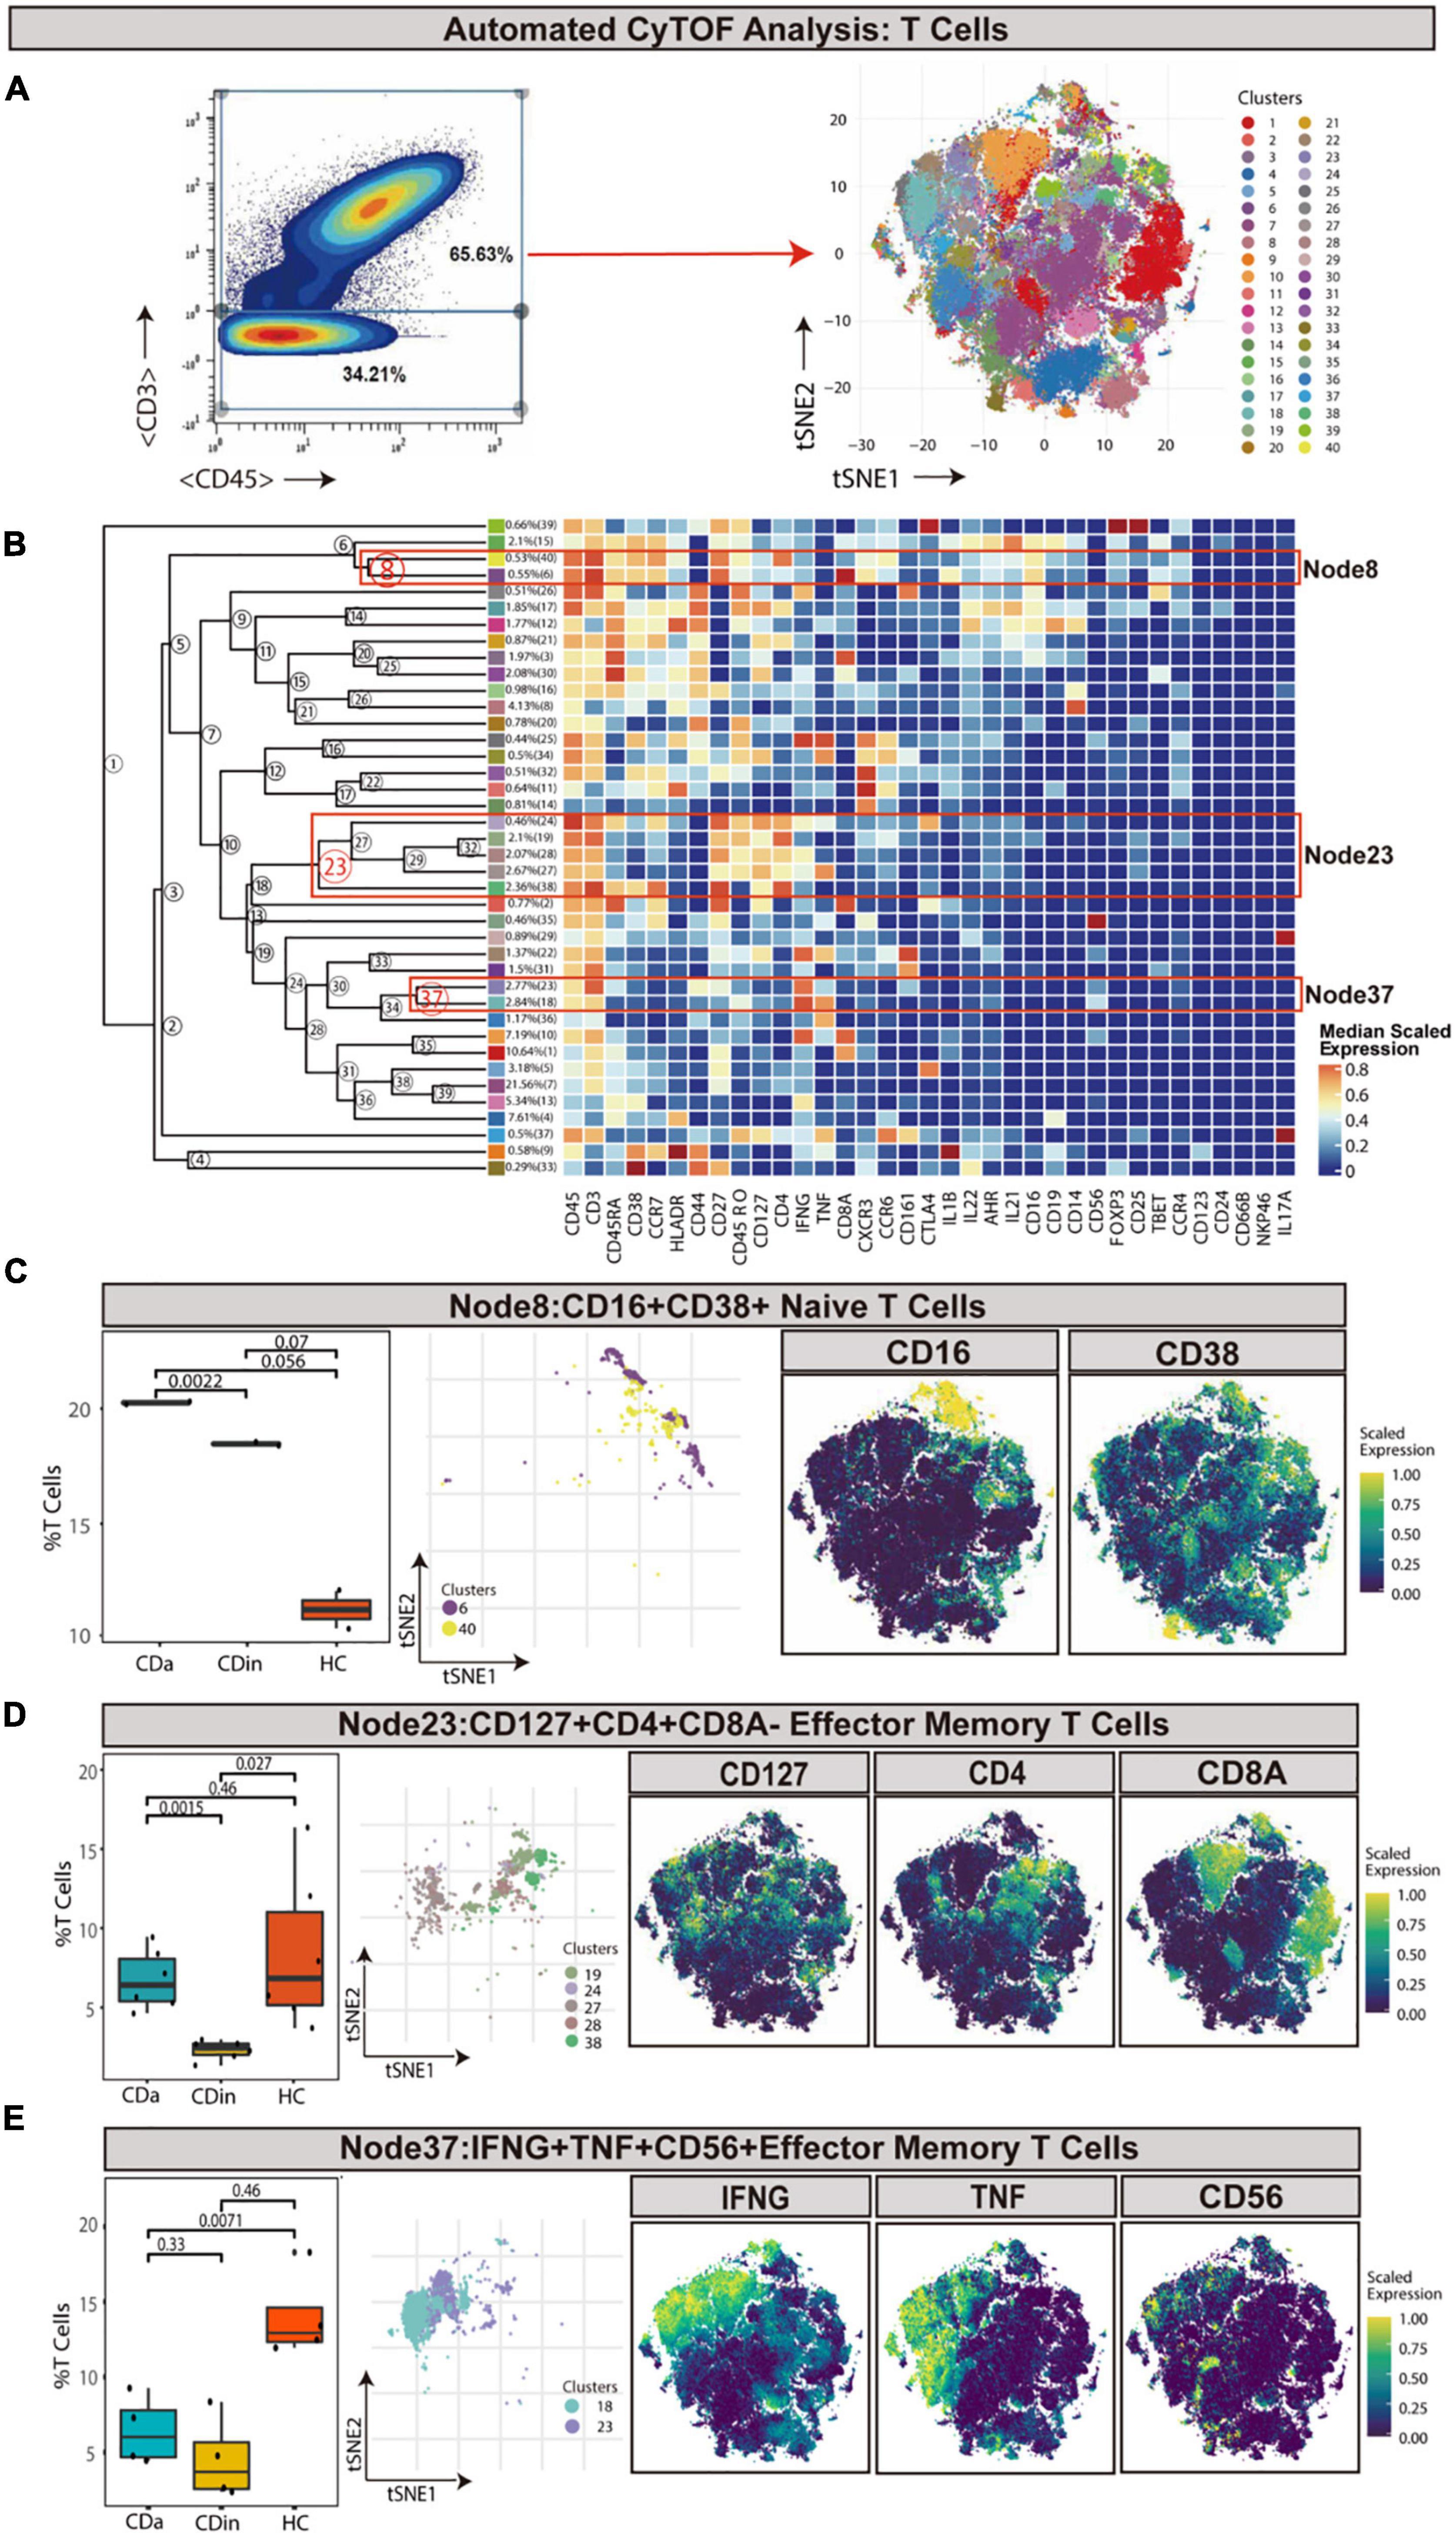 Mass cytometry and single-cell RNA sequencing reveal immune cell characteristics of active and inactive phases of Crohn’s disease